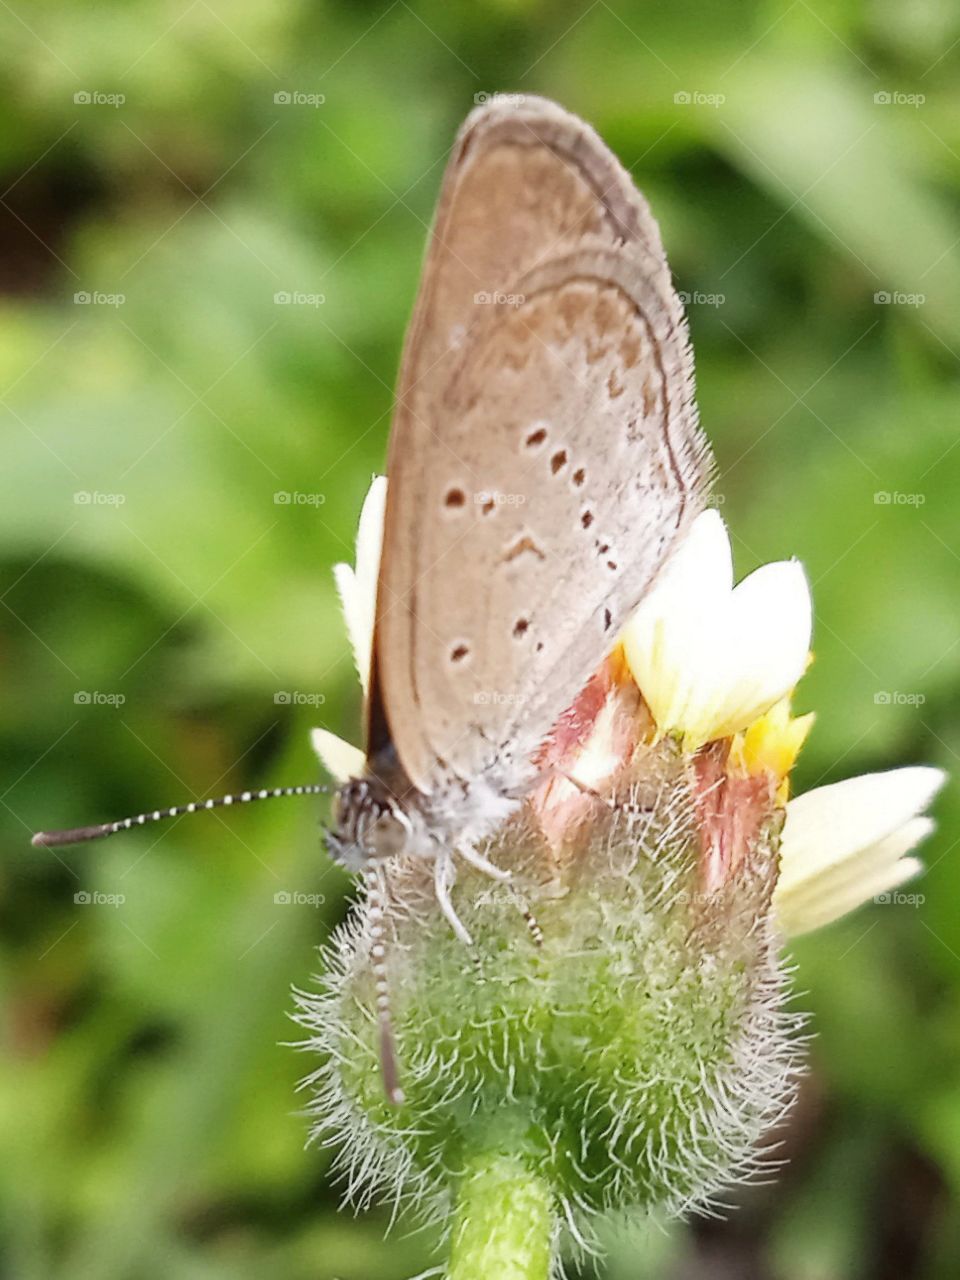 A little butterfly standing on the flower.